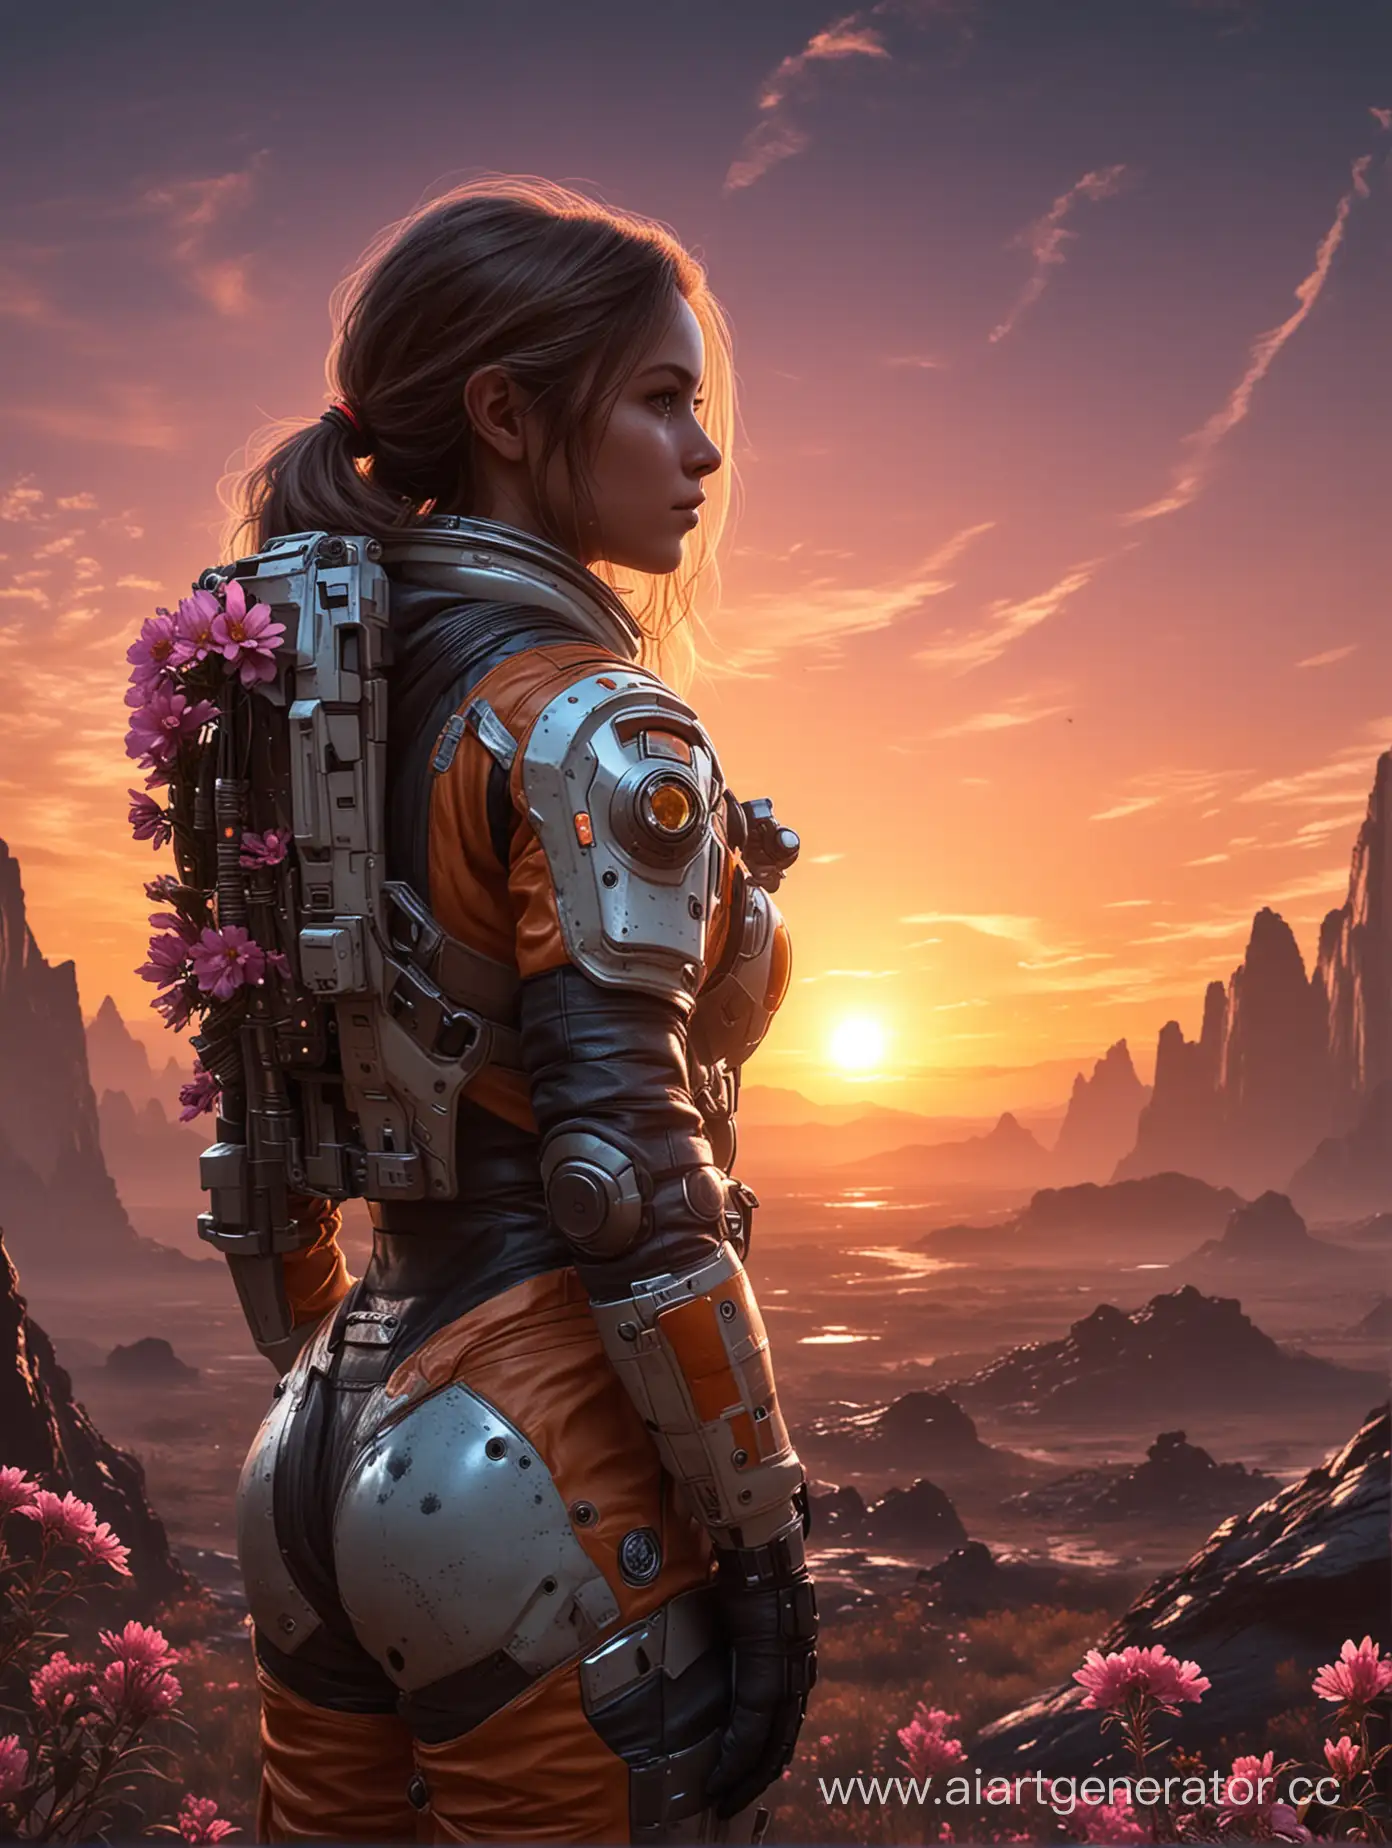 Combat-Space-Suit-Girl-Gazing-at-Sunset-on-Blooming-Planet